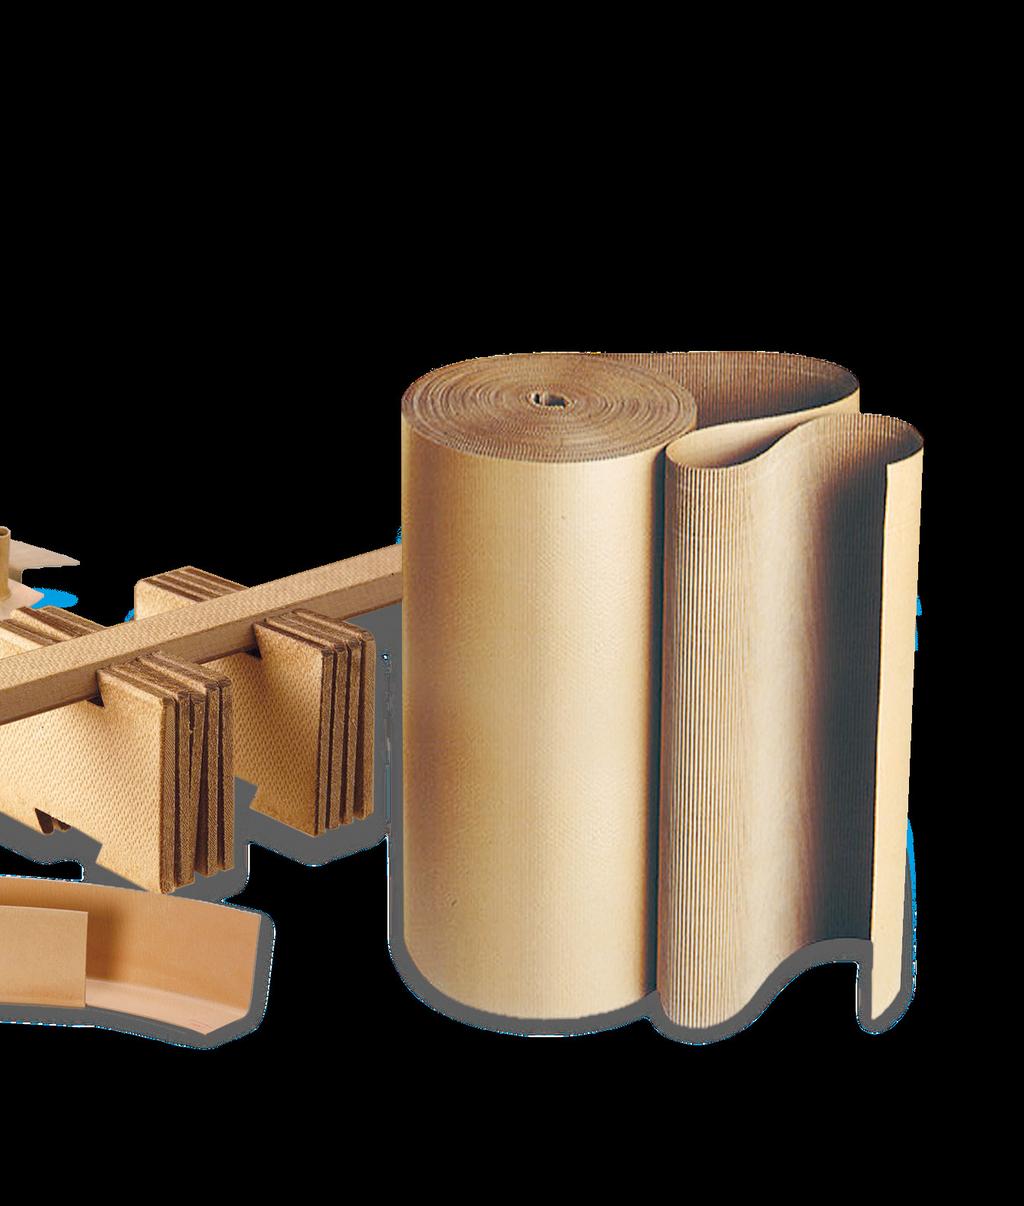 A wide range of products to meet every insulation application 9 angular, trapezoidal and T-shapes, punched and milled spacers free of burrs & sharp edges, cylinders, washers and phase barriers.